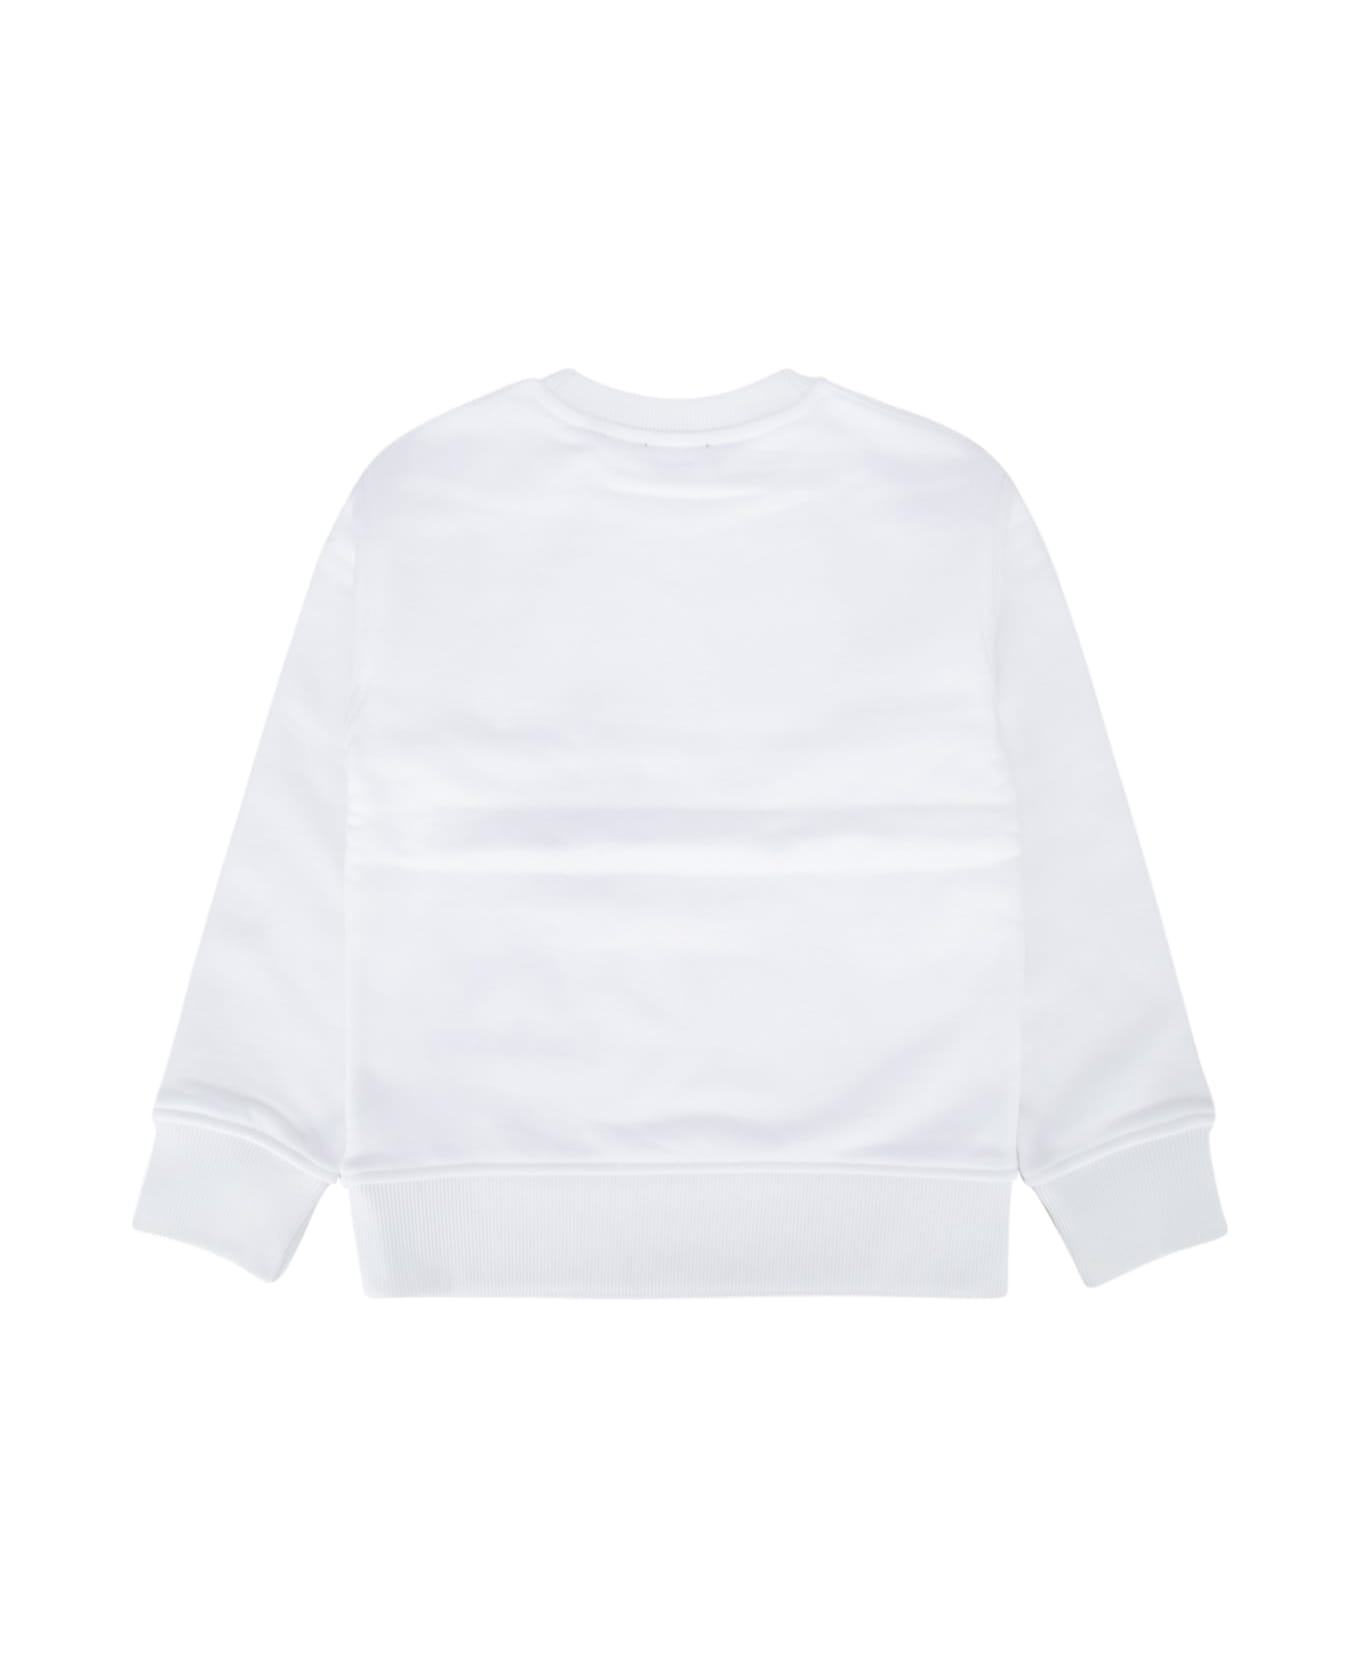 Burberry T-shirt - WHITE Tシャツ＆ポロシャツ